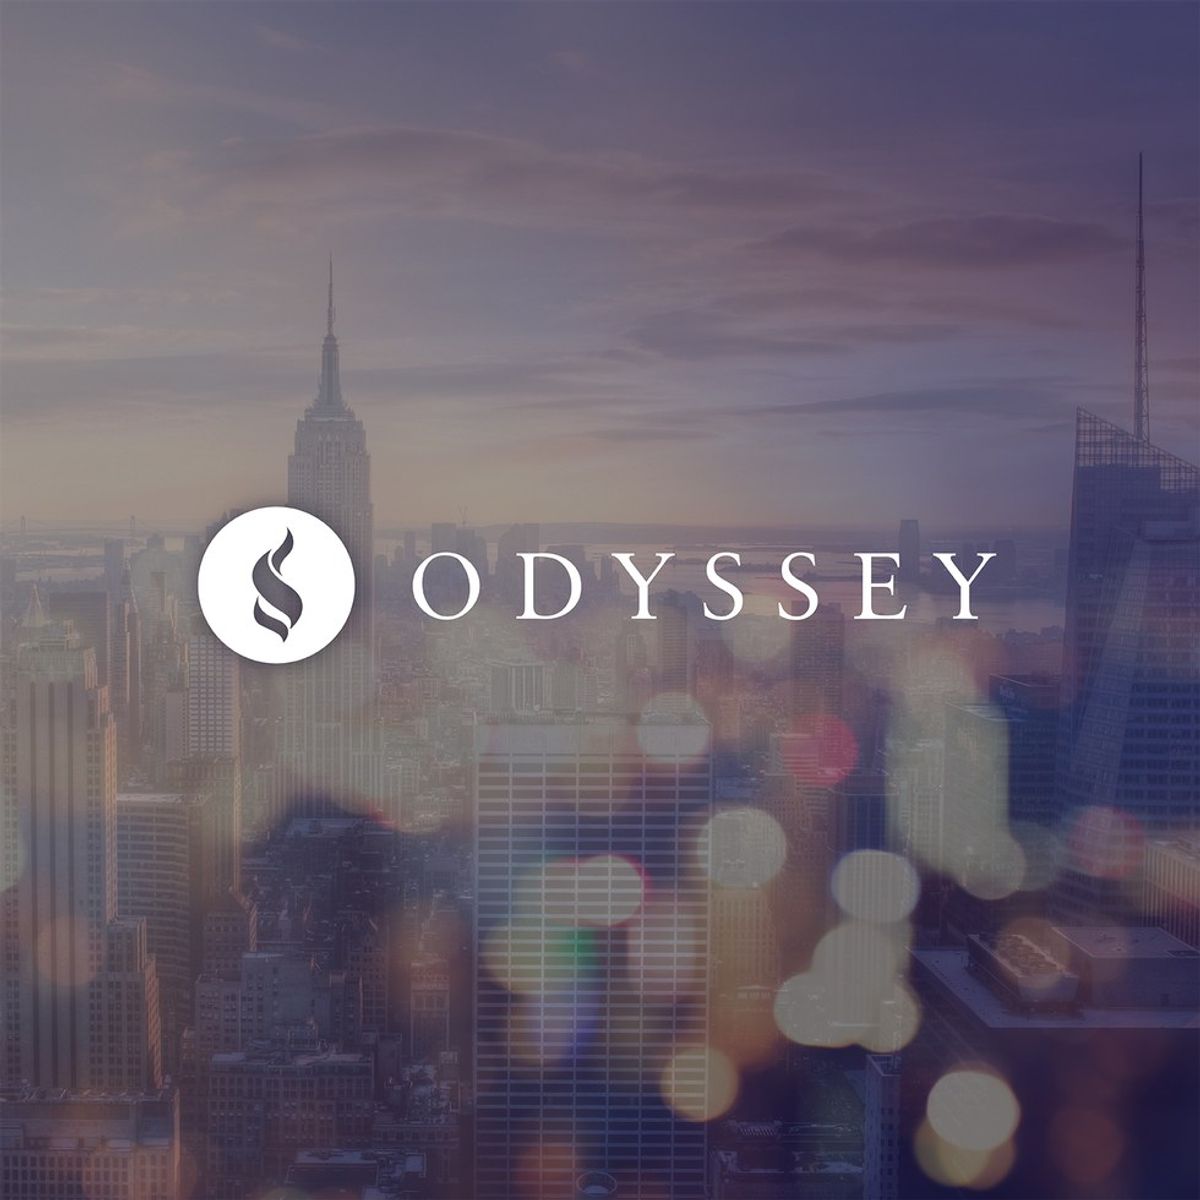 Why I Love Being An Odyssey Editor-In-Chief